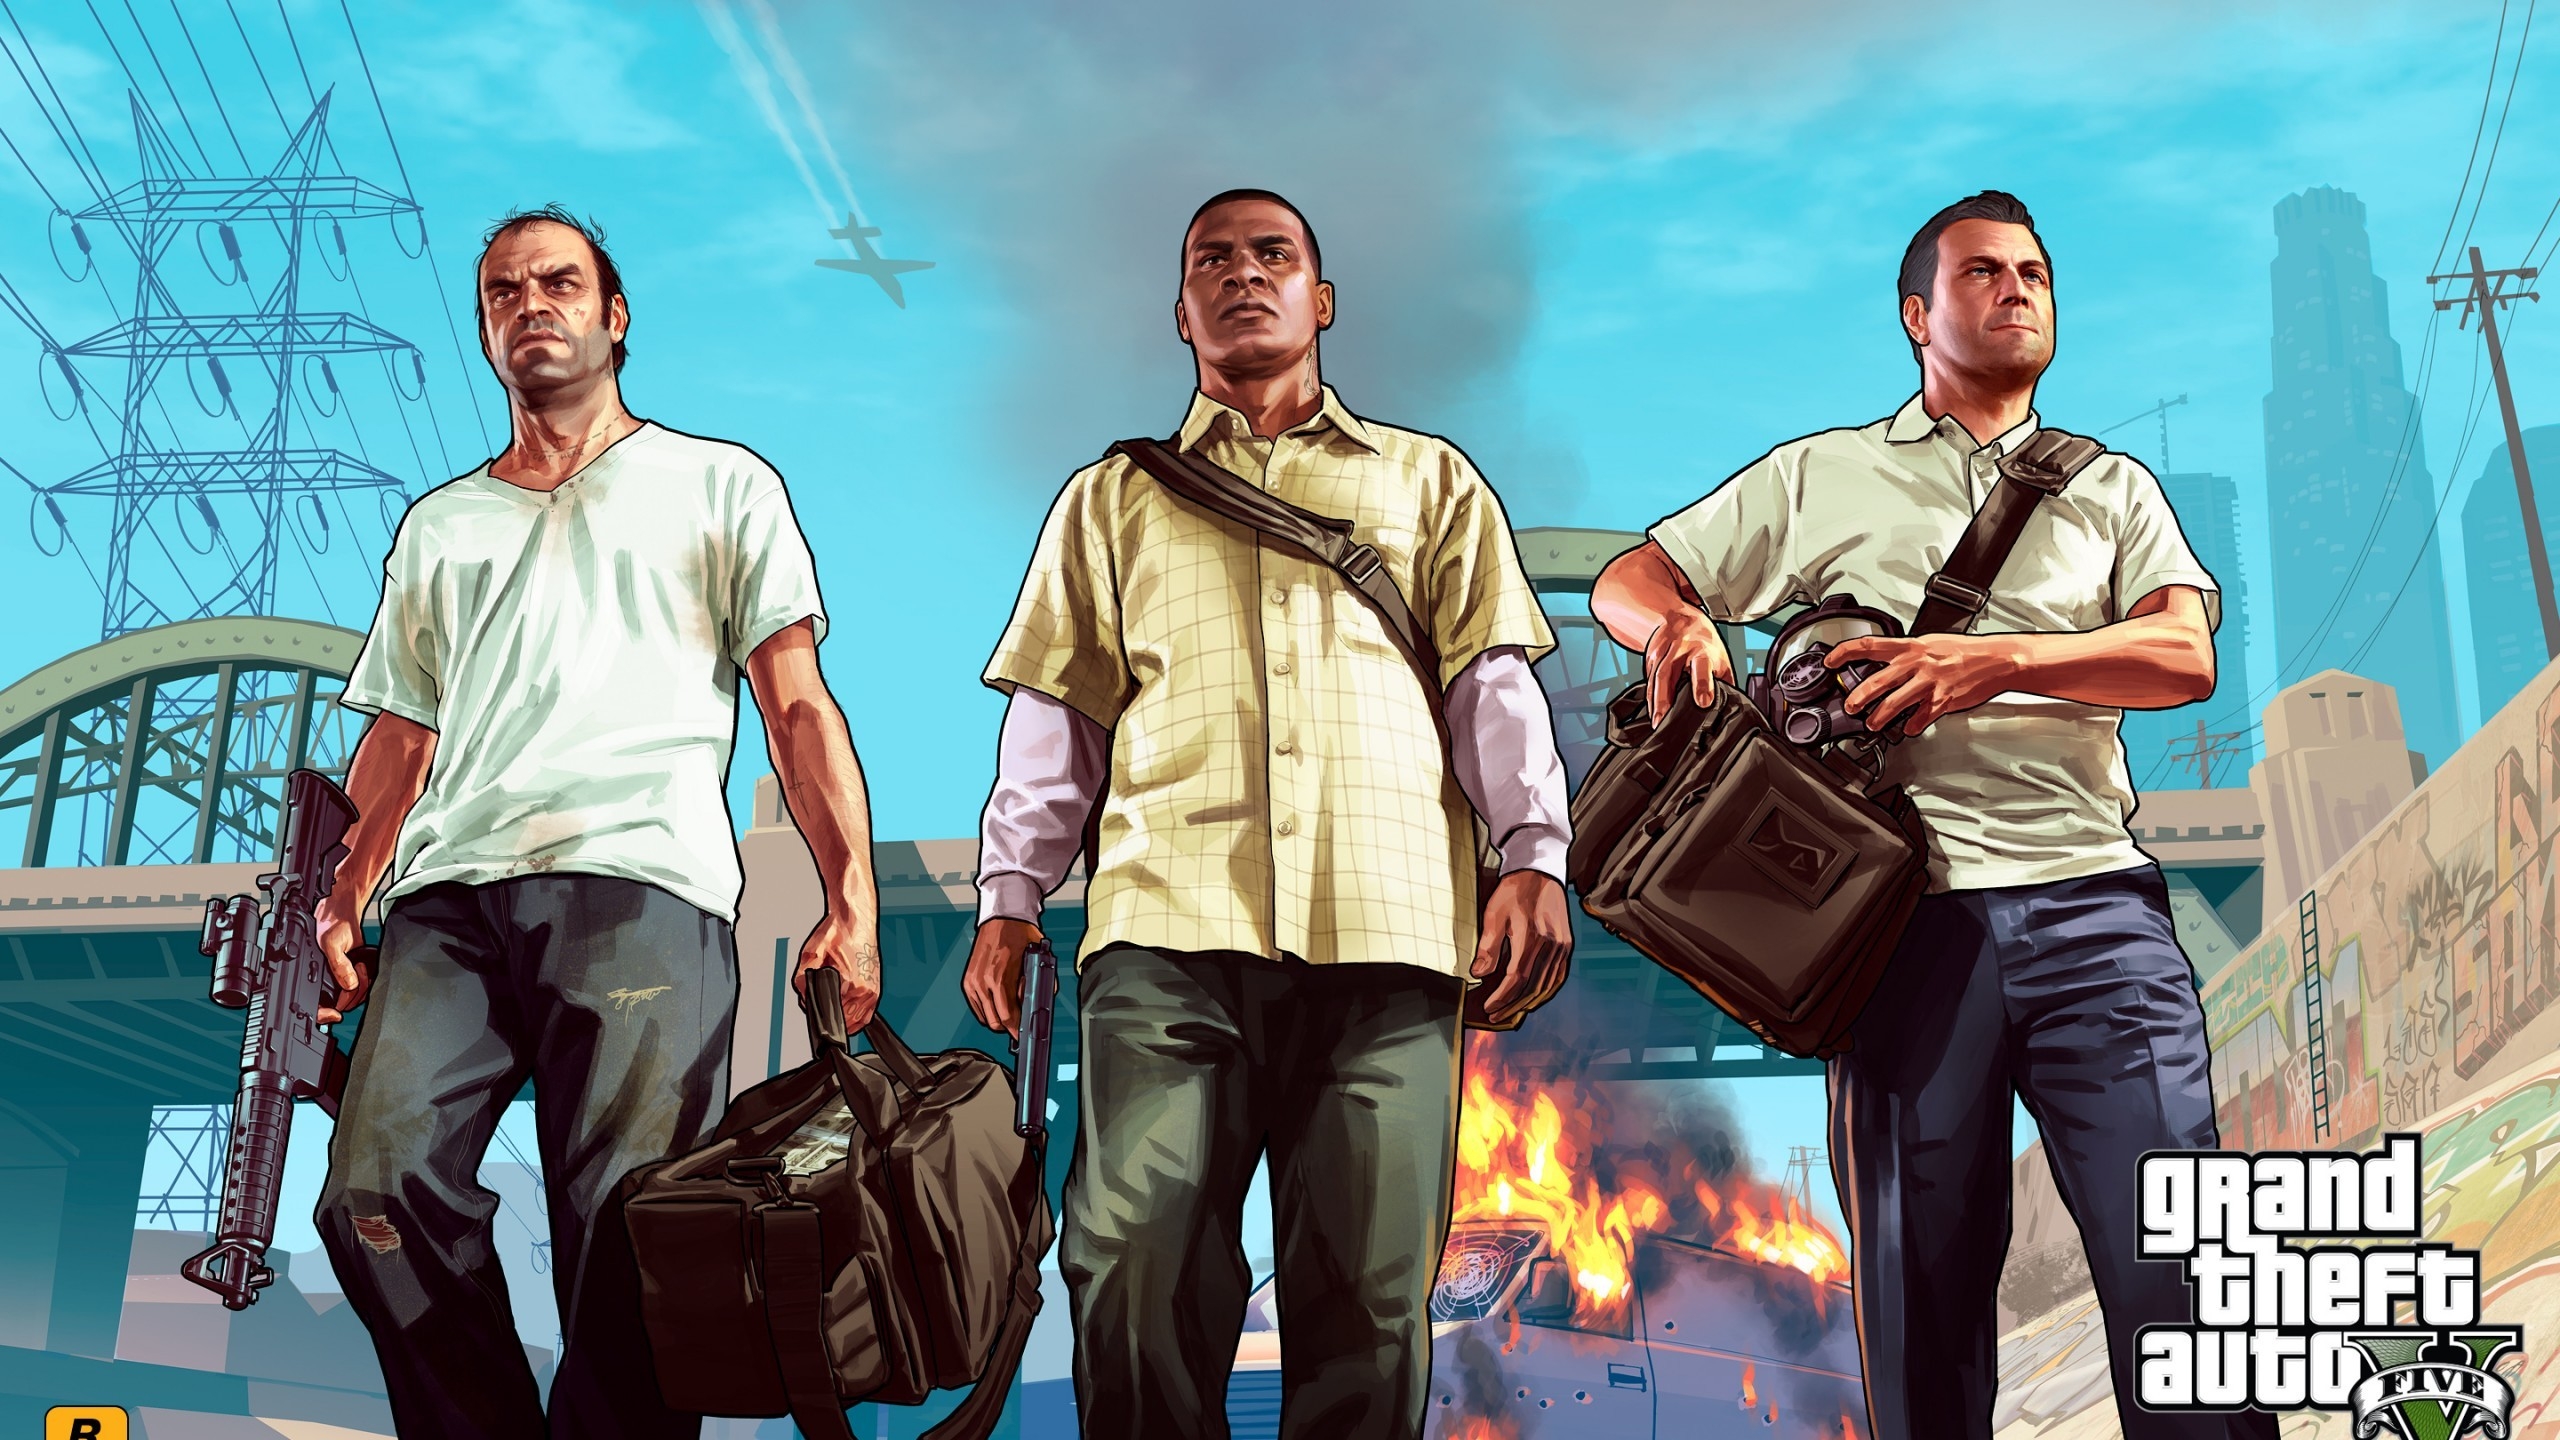 Grand Theft Auto Vice City for 2560x1440 HDTV resolution